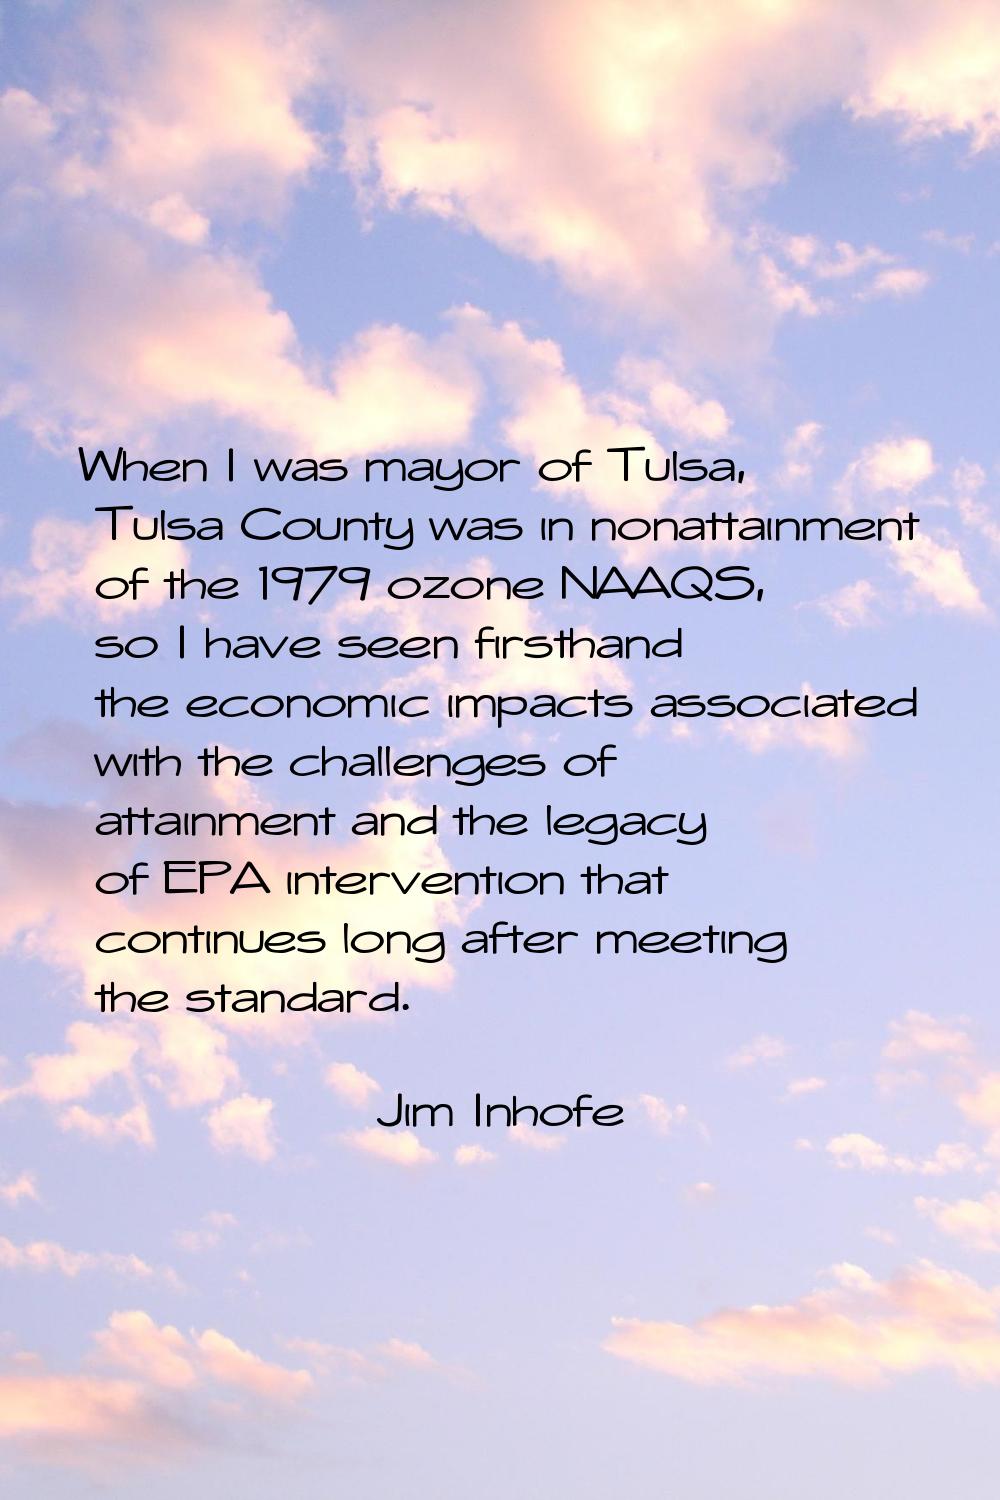 When I was mayor of Tulsa, Tulsa County was in nonattainment of the 1979 ozone NAAQS, so I have see